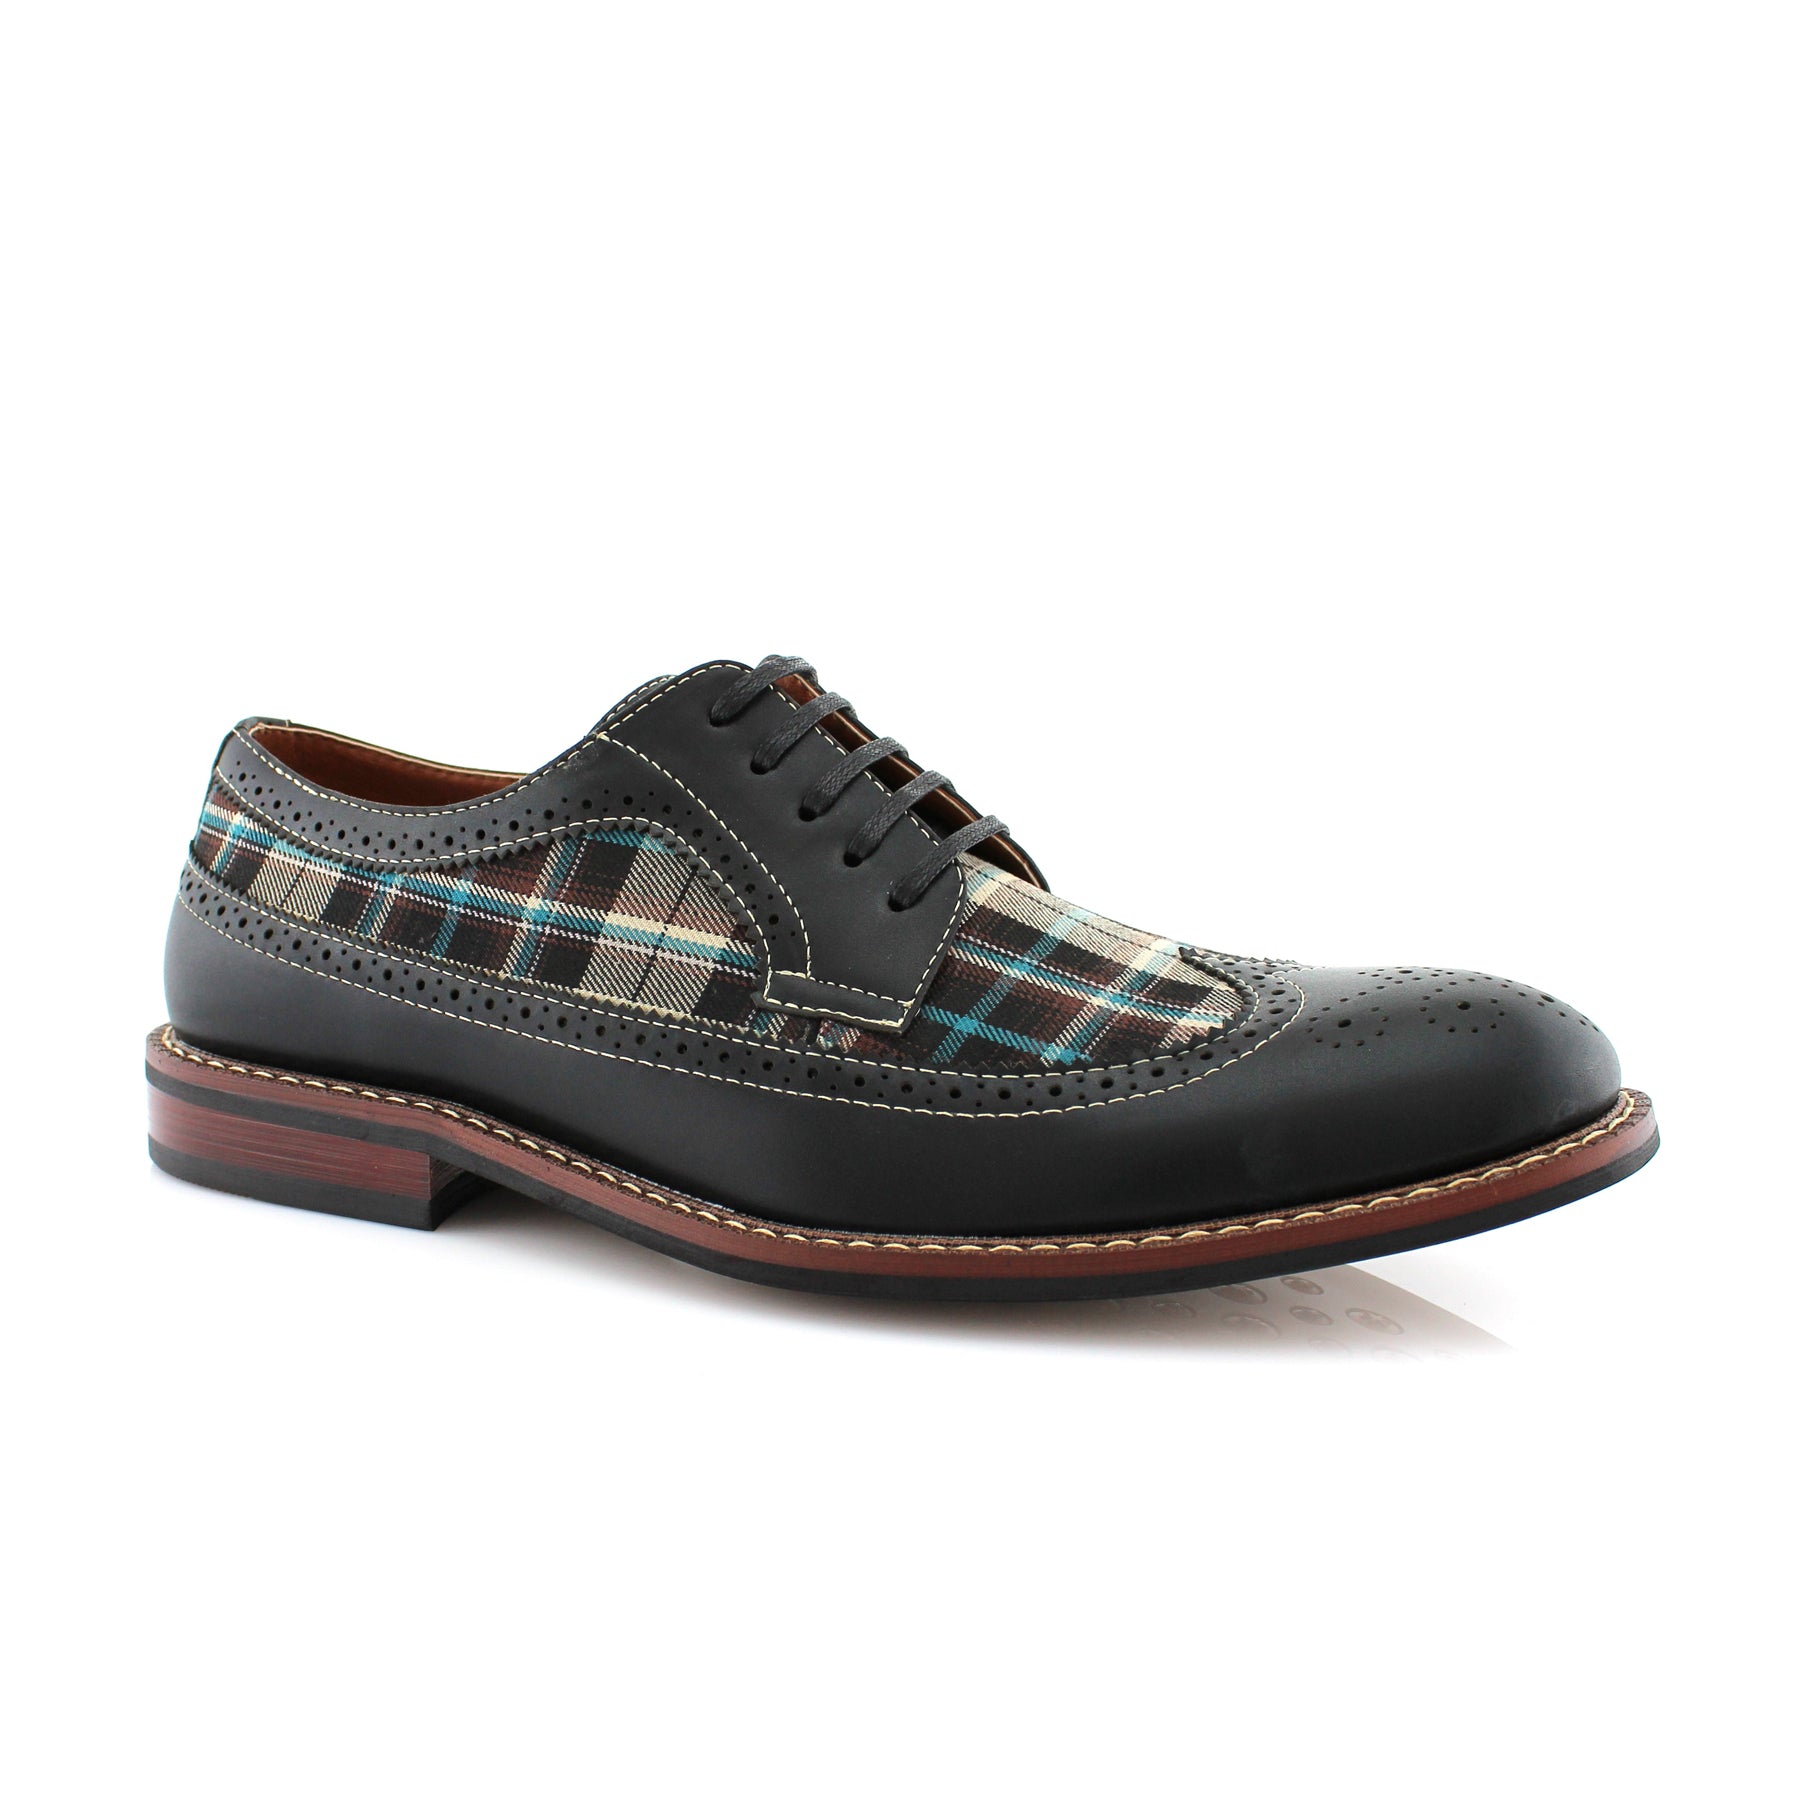 Plaid Long Wingtip Brogue Derby Shoes | Ron by Ferro Aldo | Conal Footwear | Main Angle View